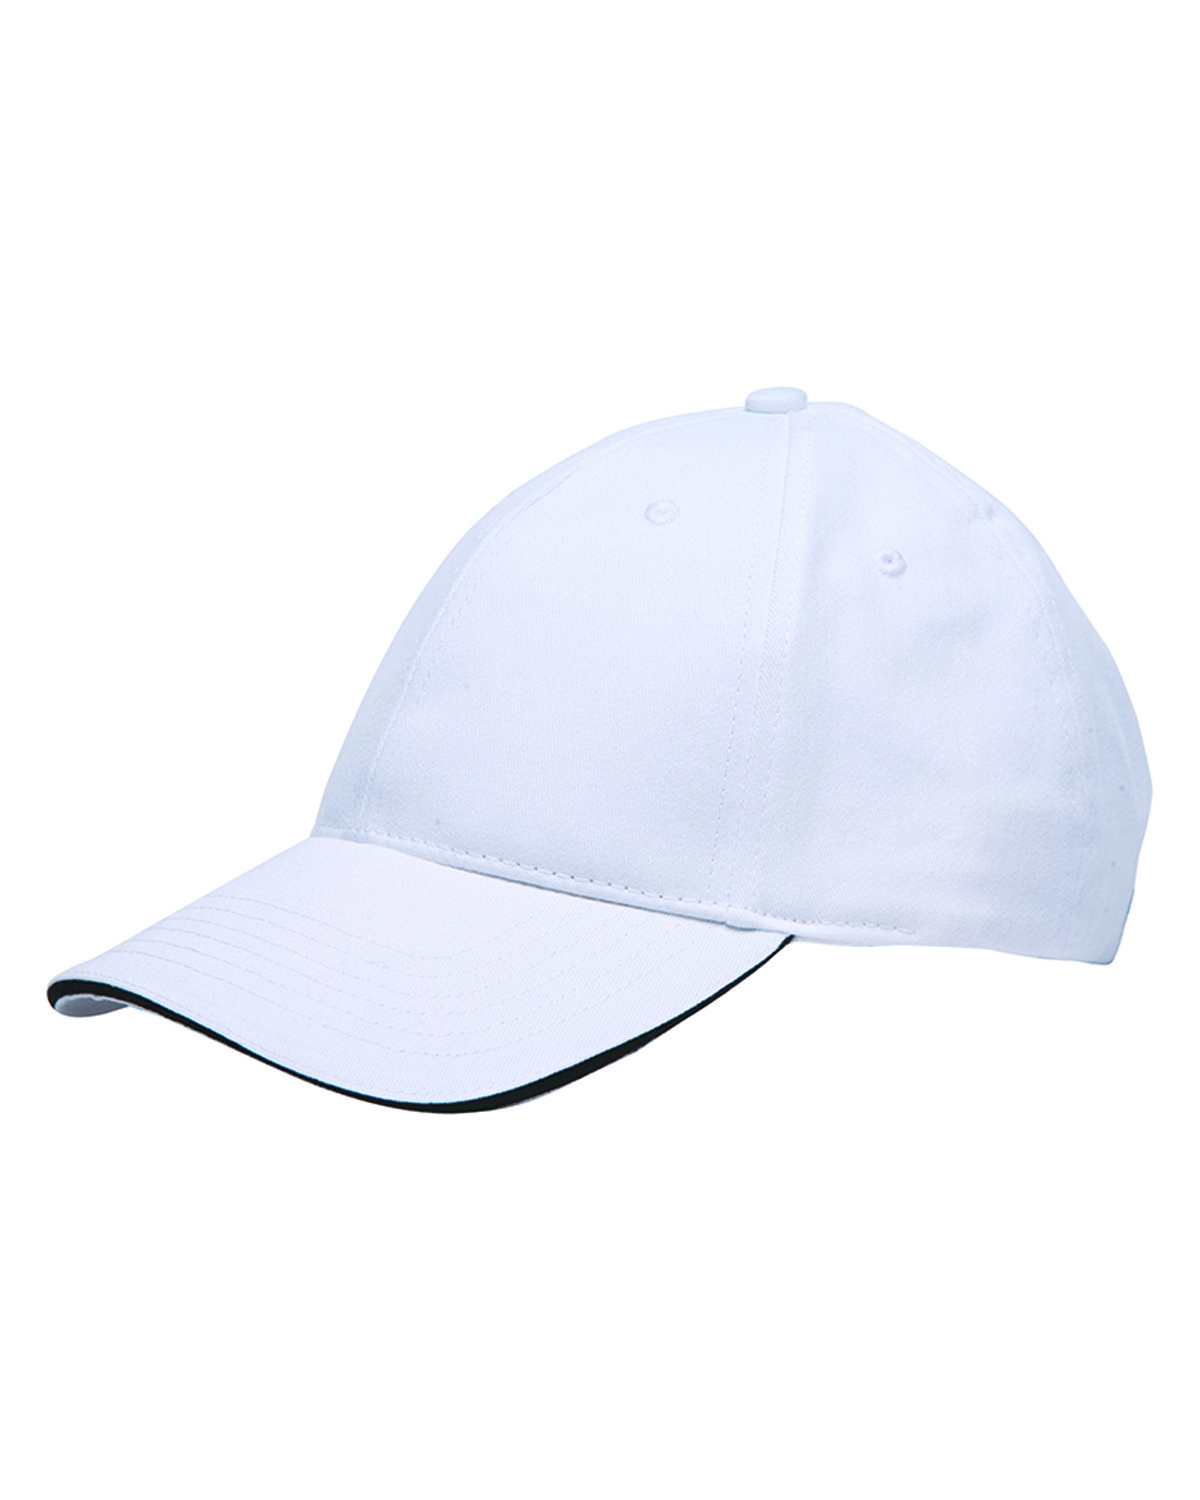 100% Washed Cotton Unstructured Sandwich Cap-Bayside